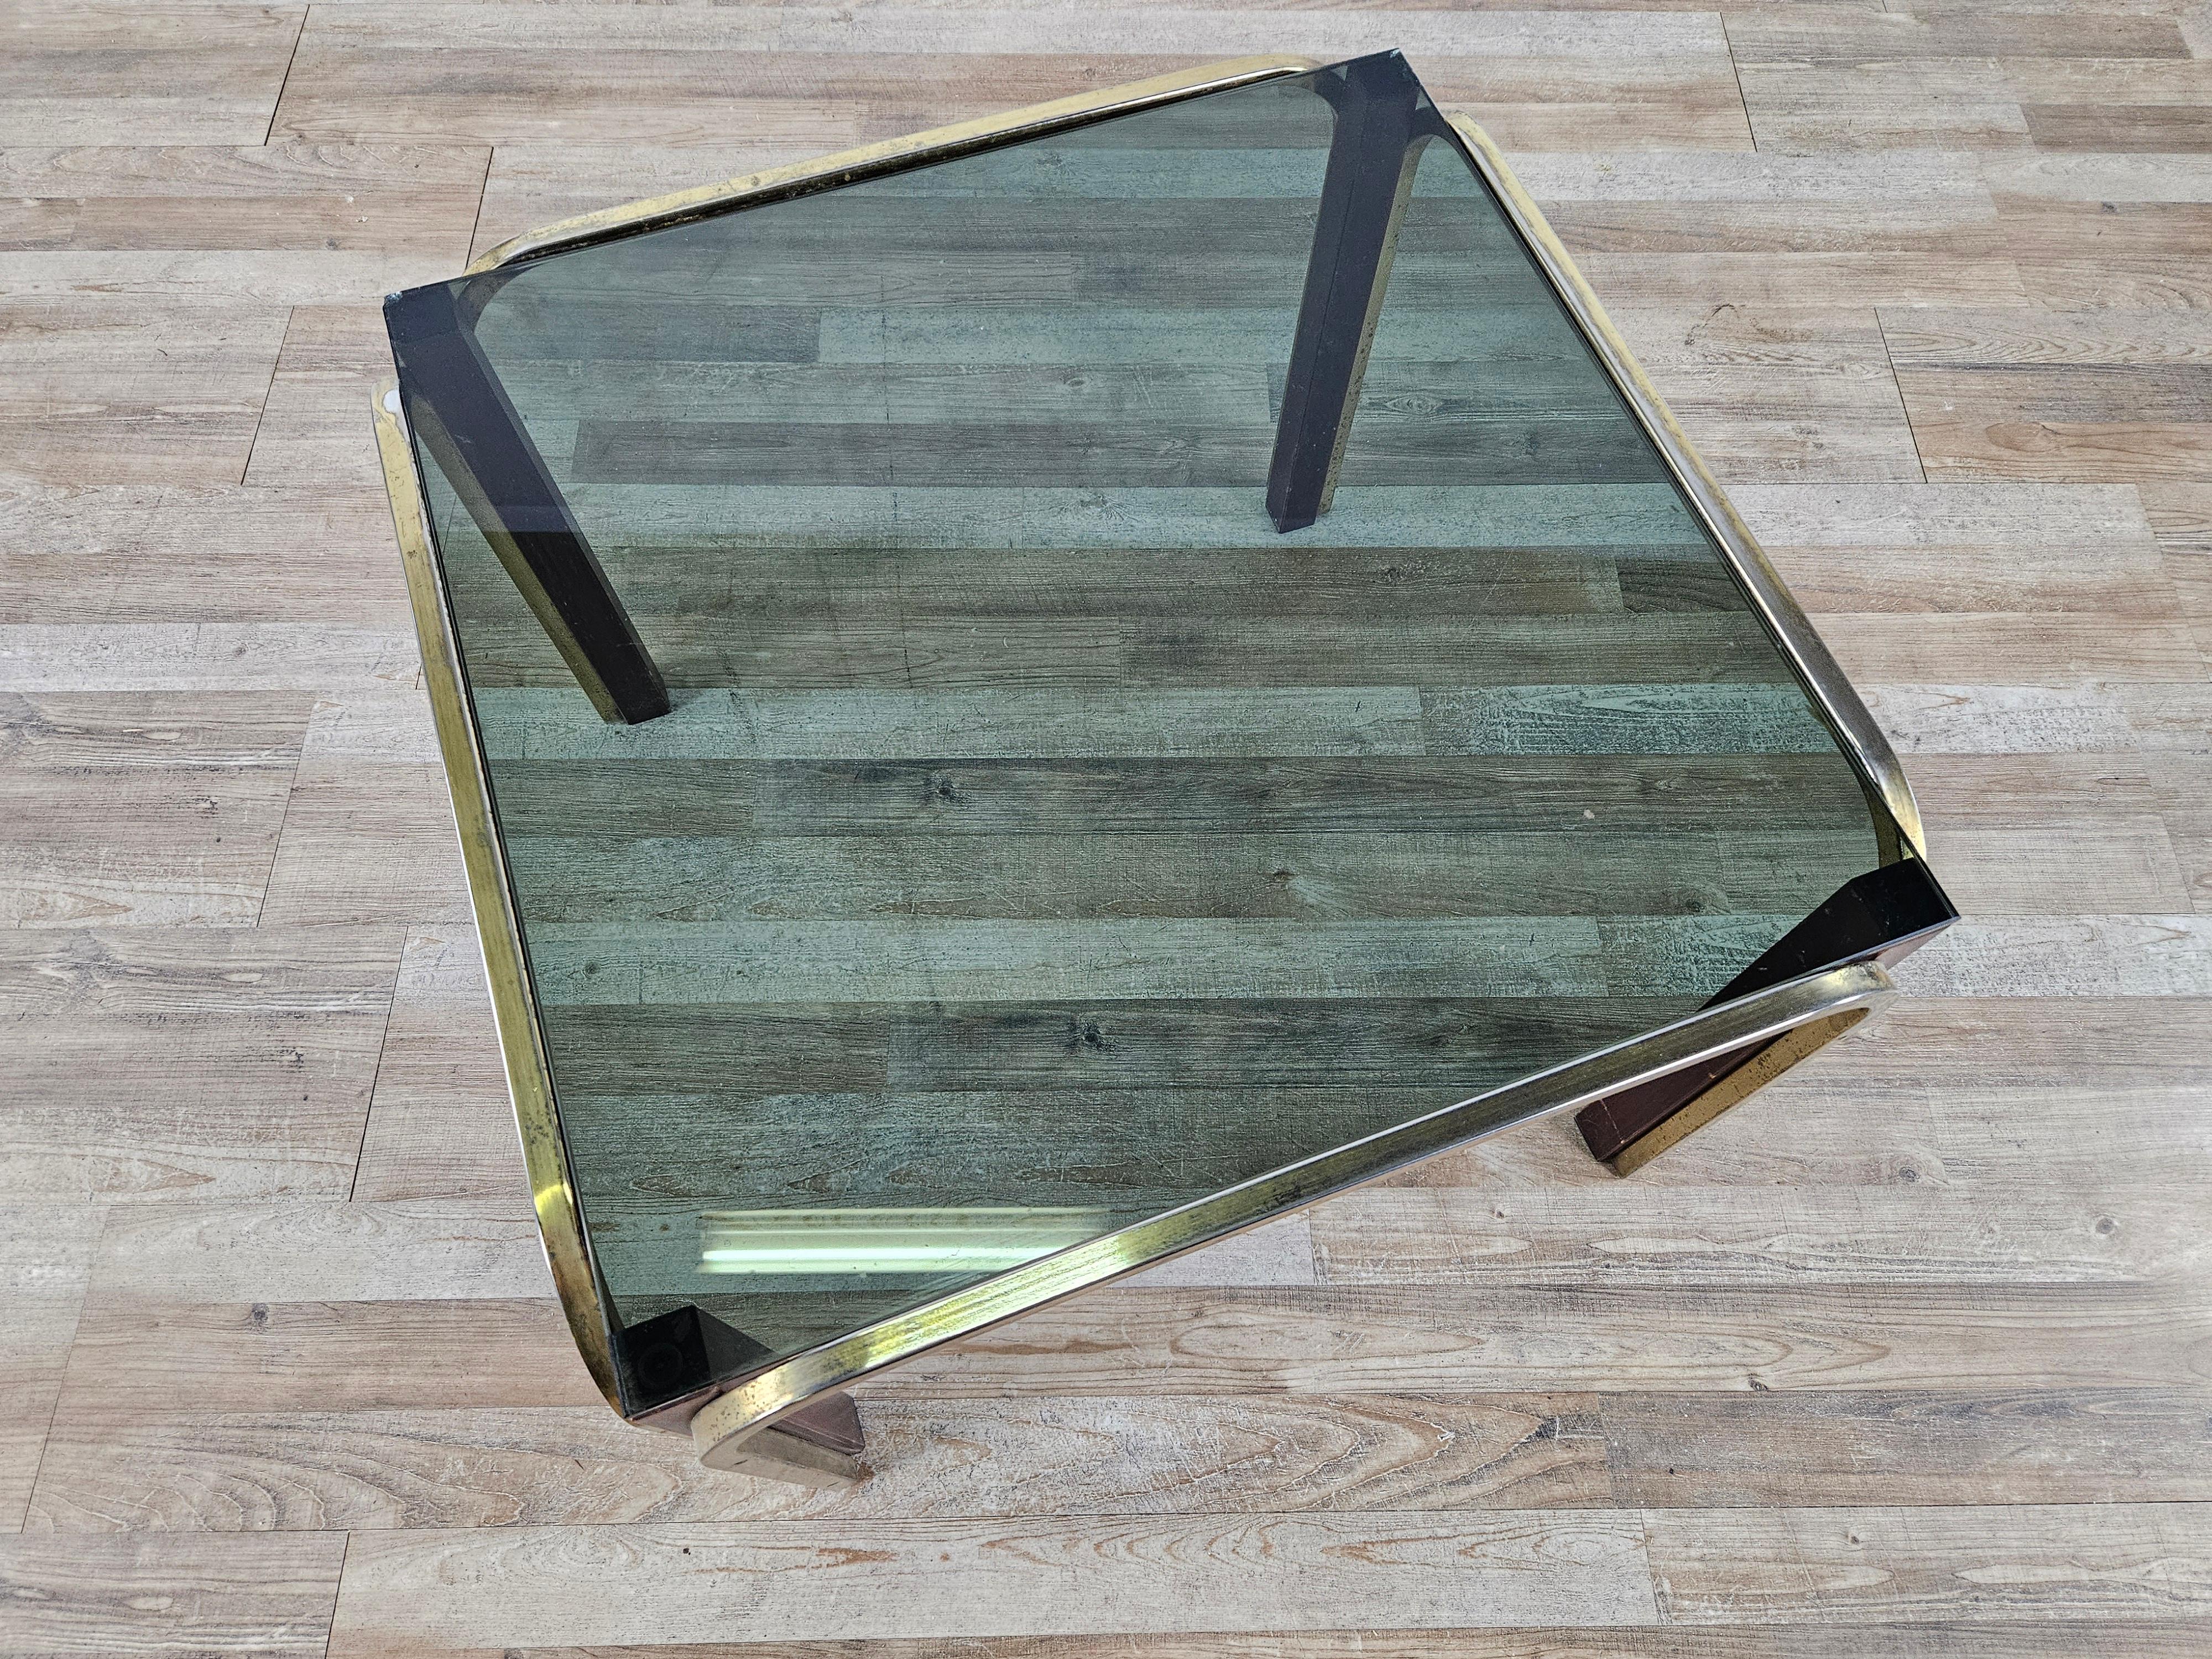 Gold metal coffee table with wooden legs and smoked glass top.

Glass has some cracks in two corners, recommended new glass or cloth top.